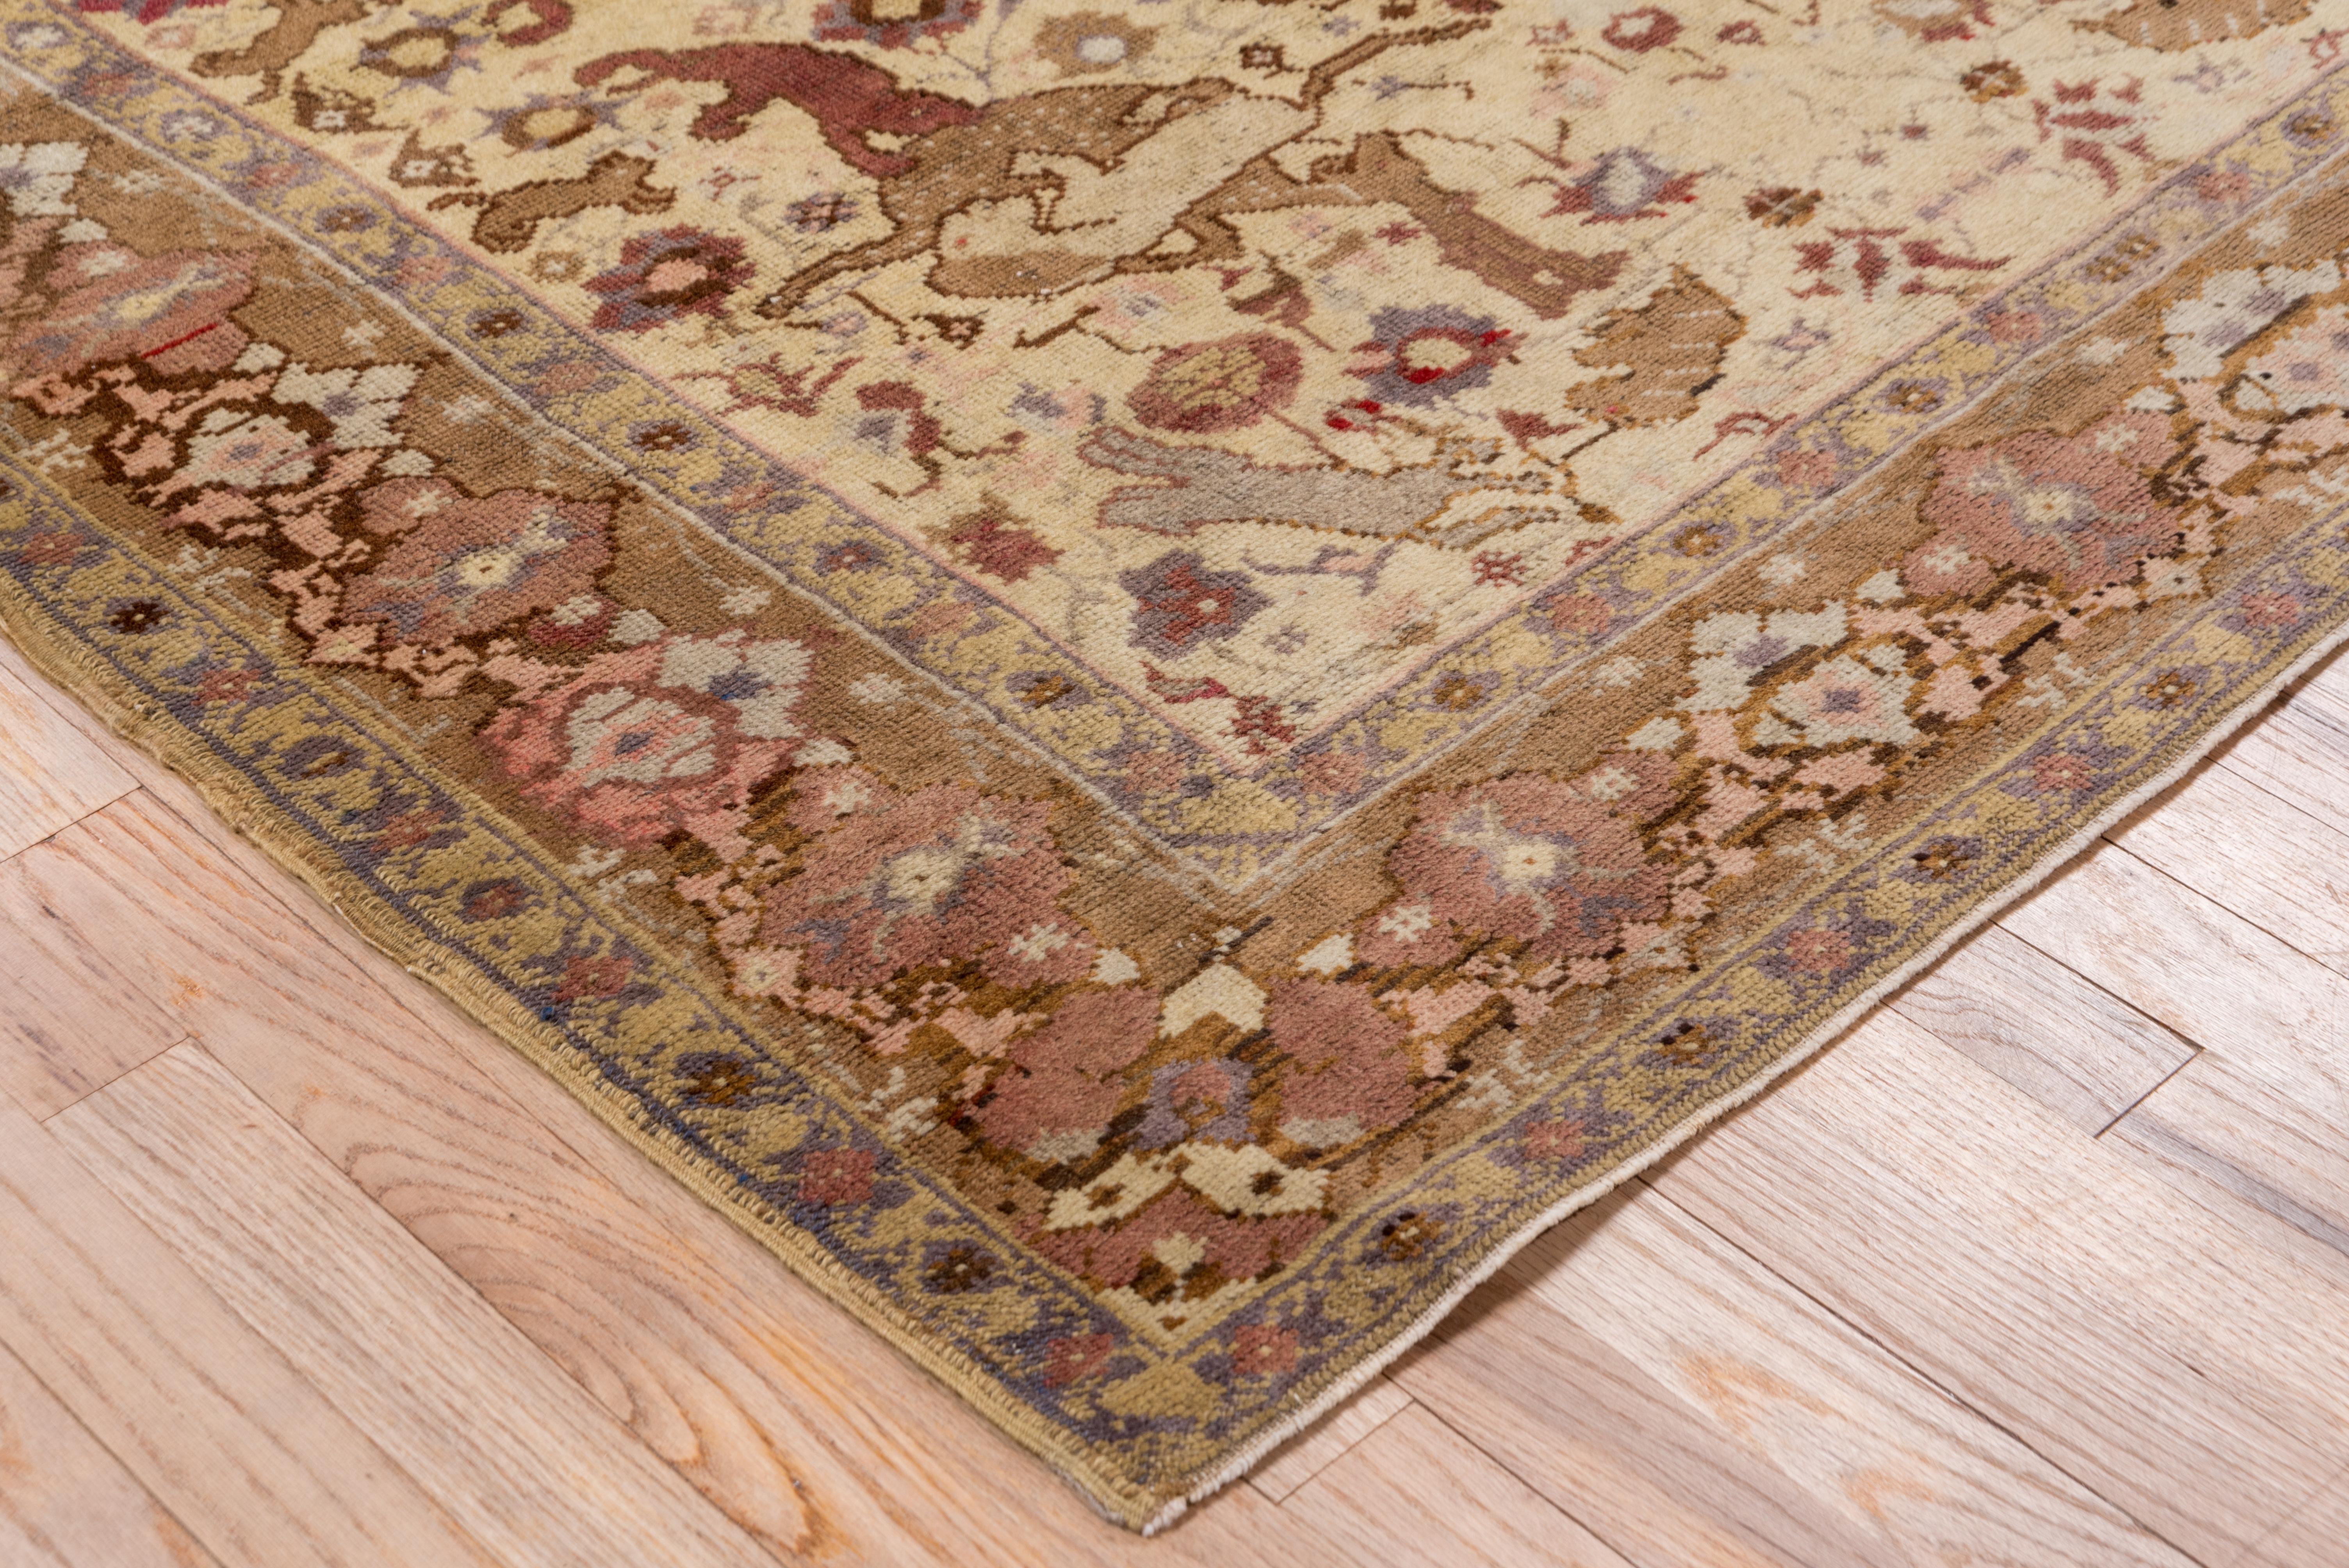 Hand-Knotted Antique Karabagh Rug with Animal Motifs